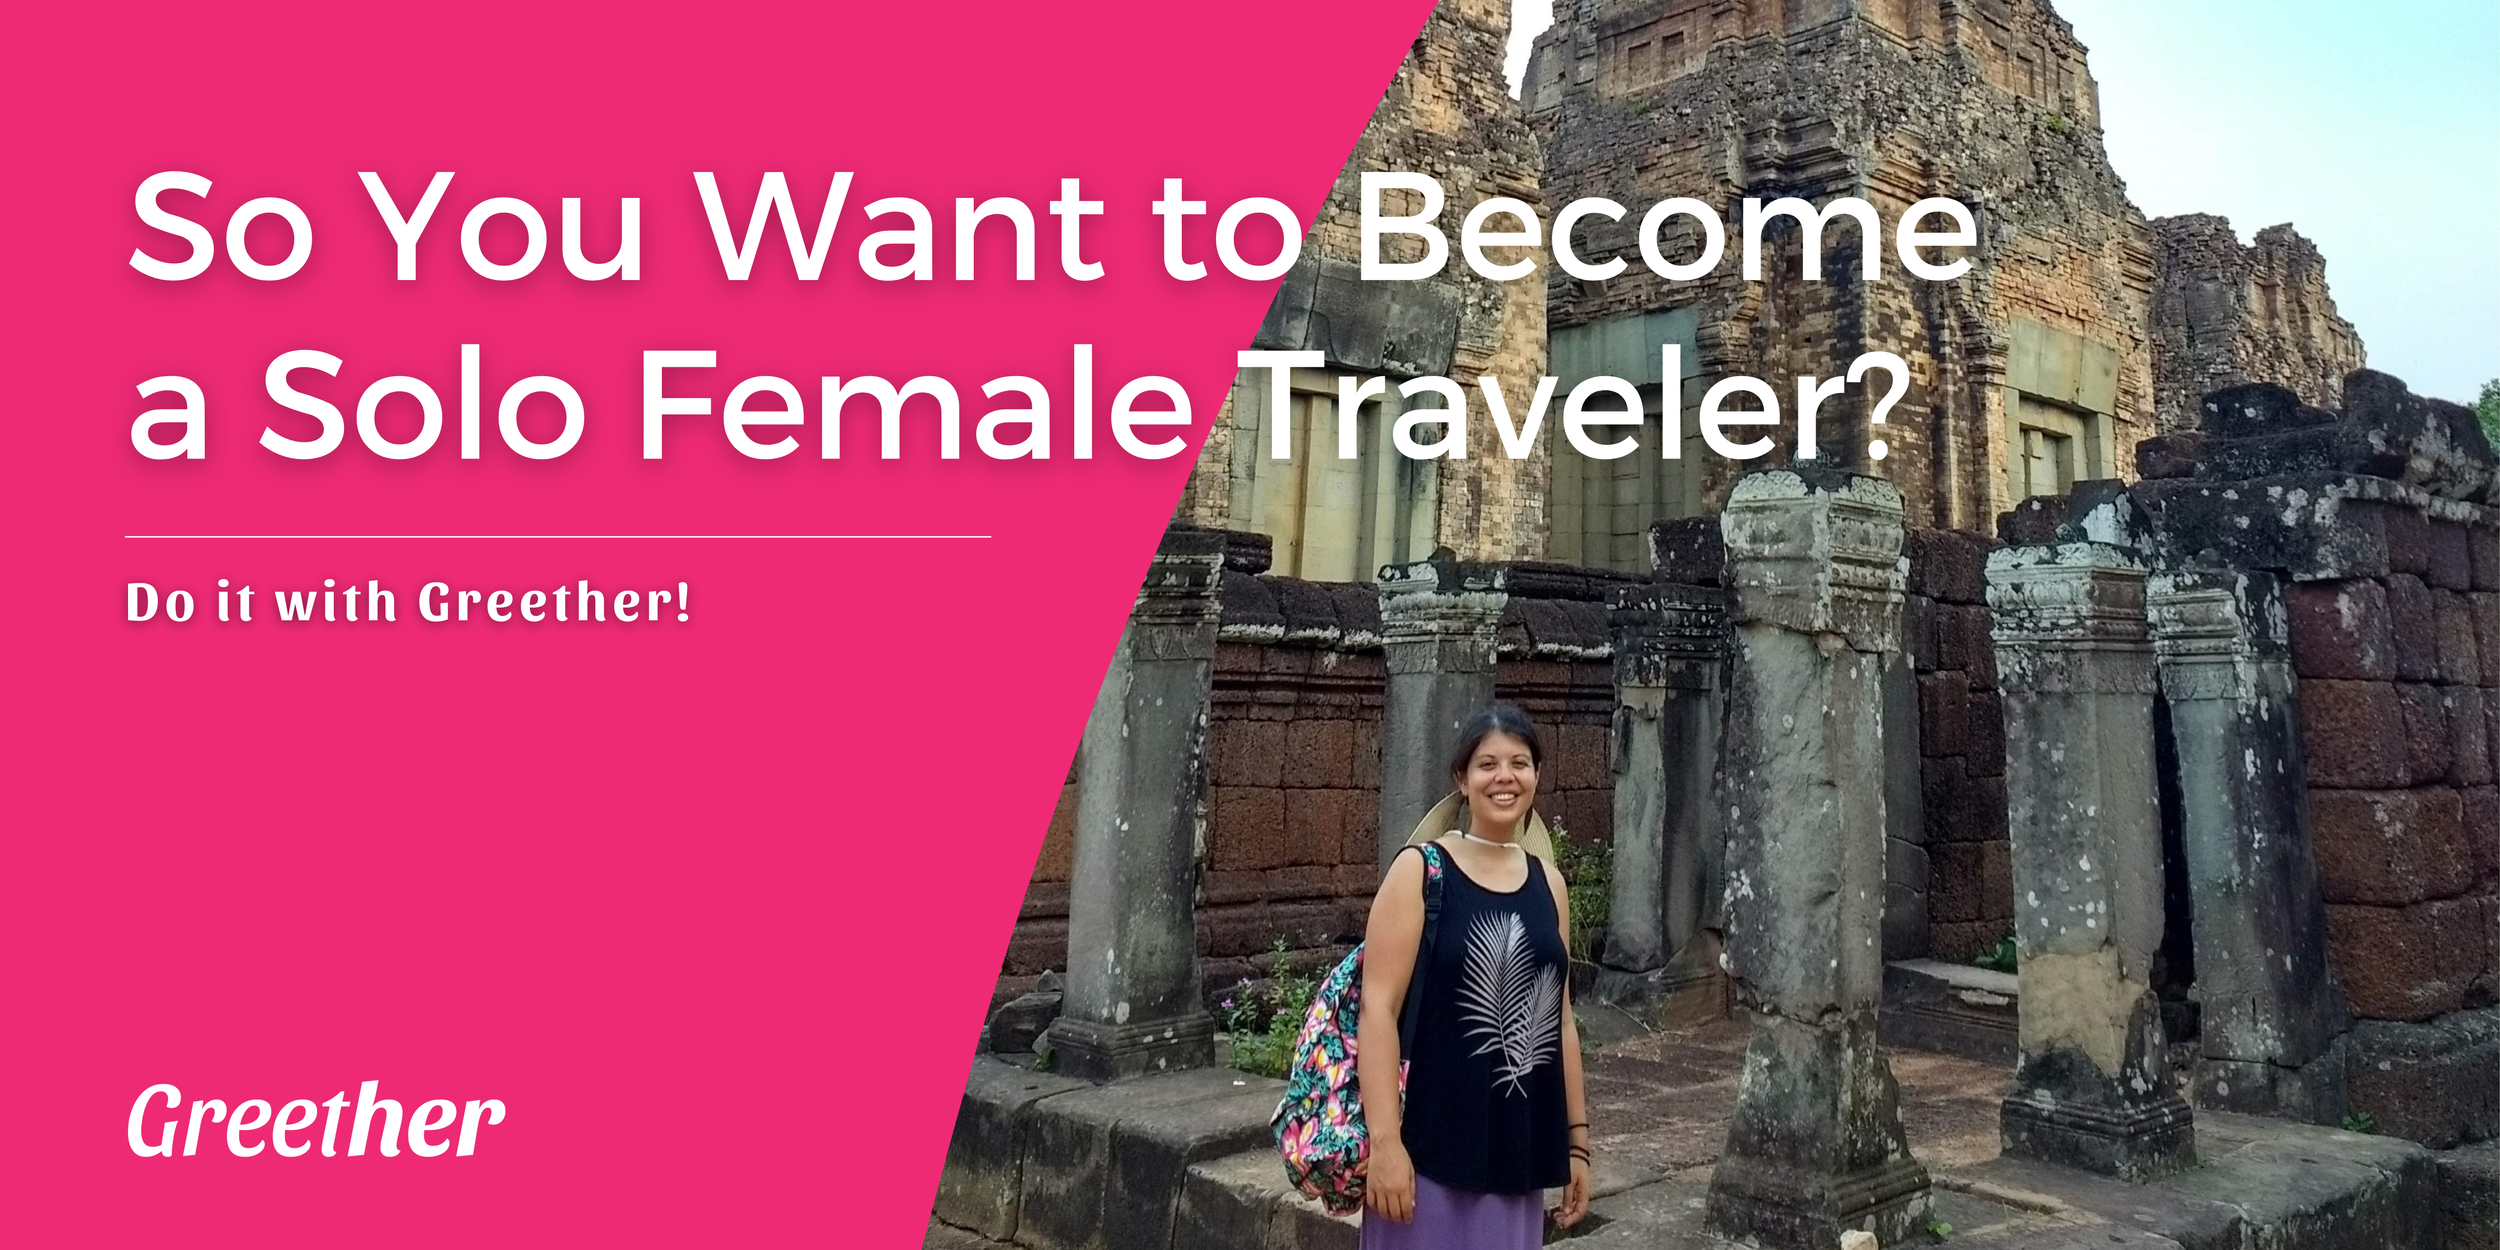 So You Want to Become a Solo Female Traveler?